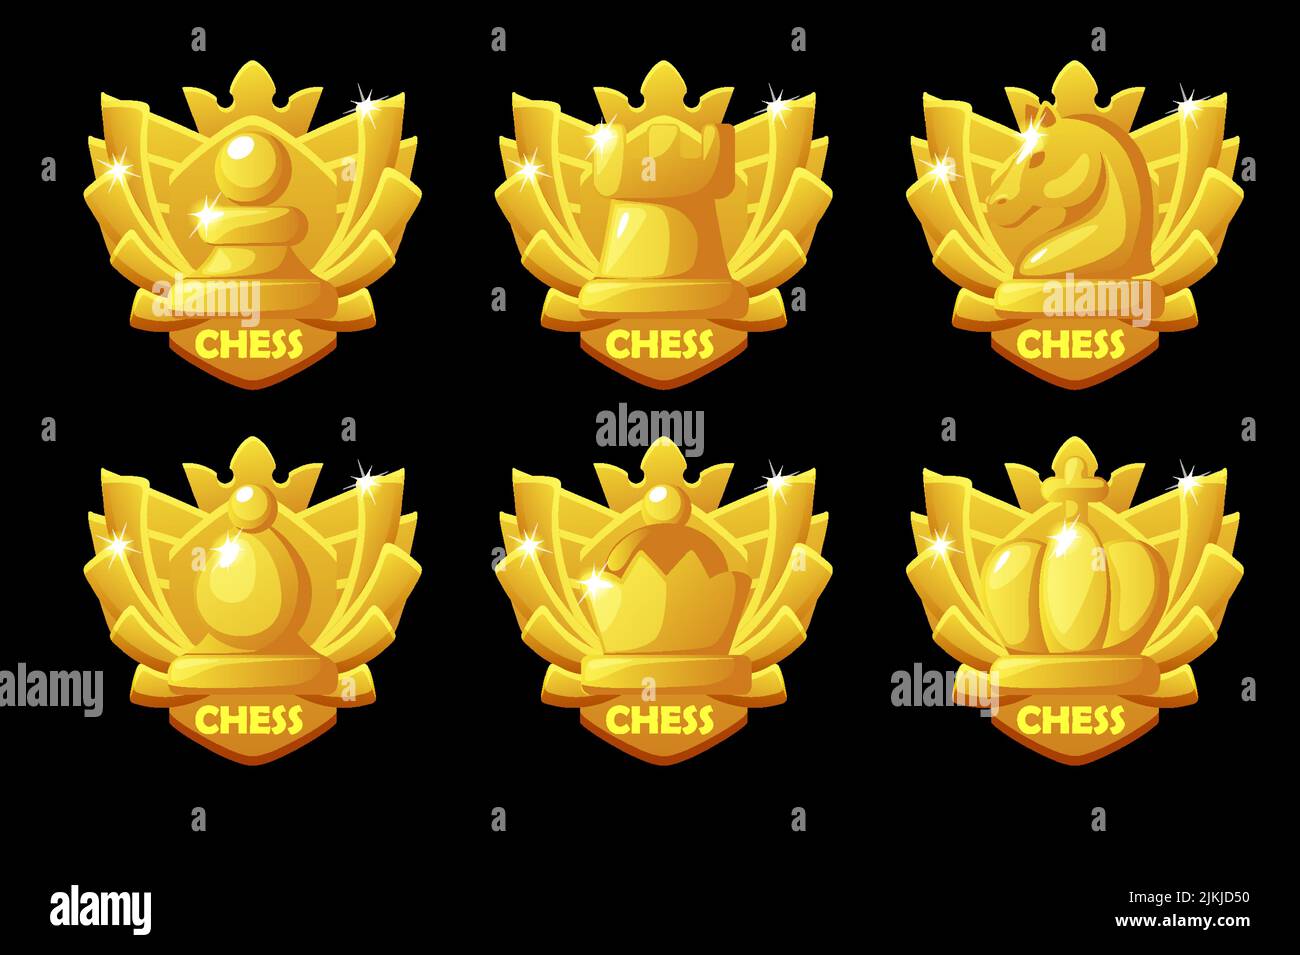 Chess, chess master, game, medal icon - Download on Iconfinder